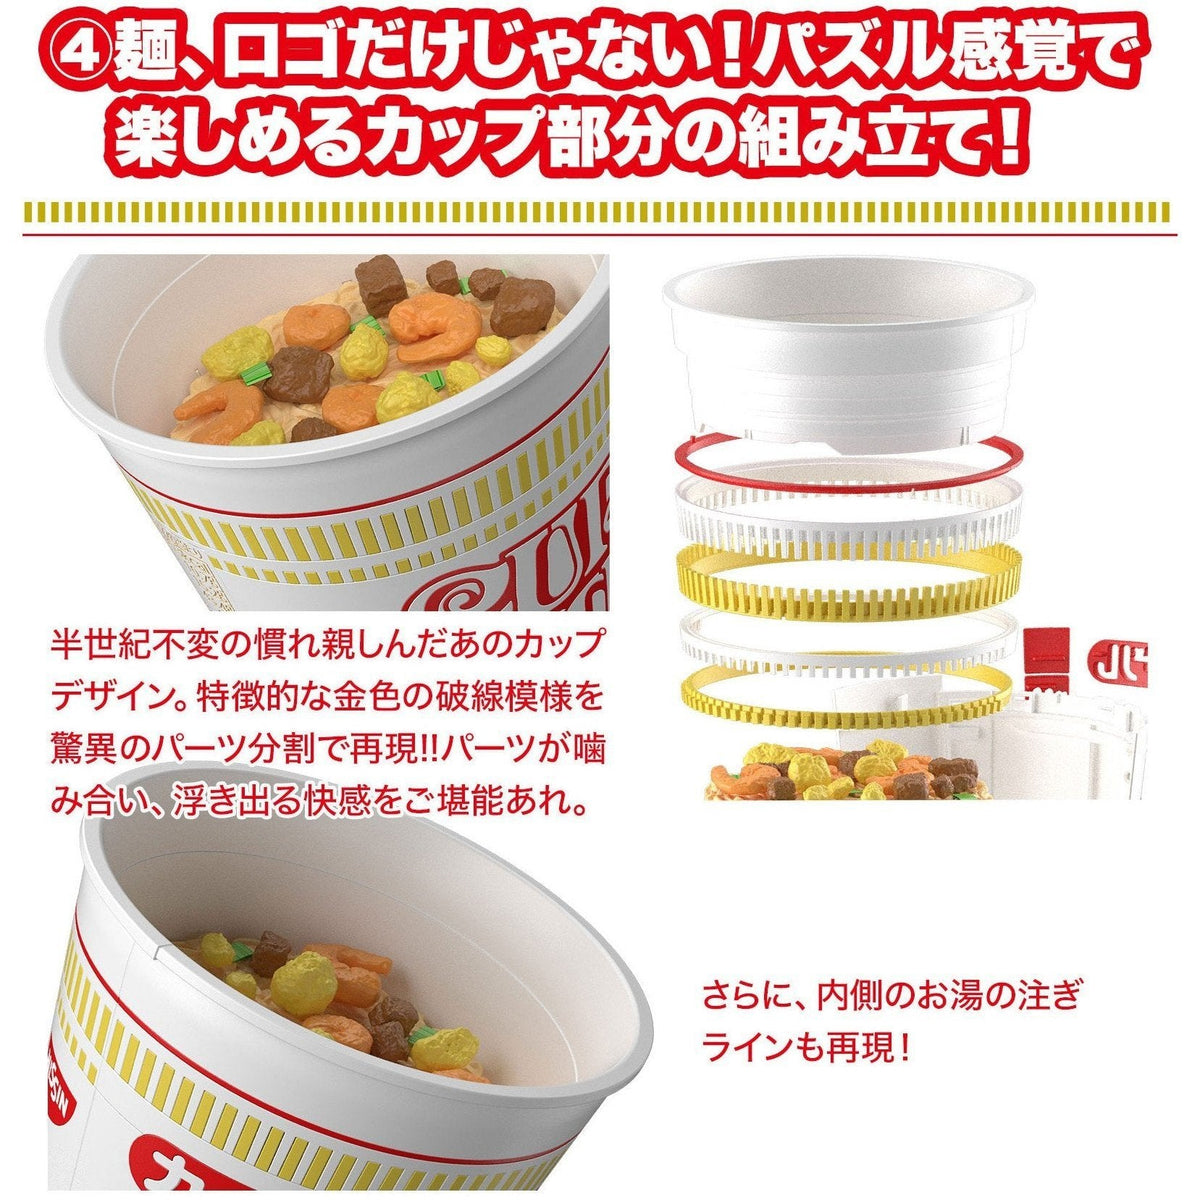 Best Hit Chronicle 1/1 Cup Noodle-Bandai-Ace Cards &amp; Collectibles